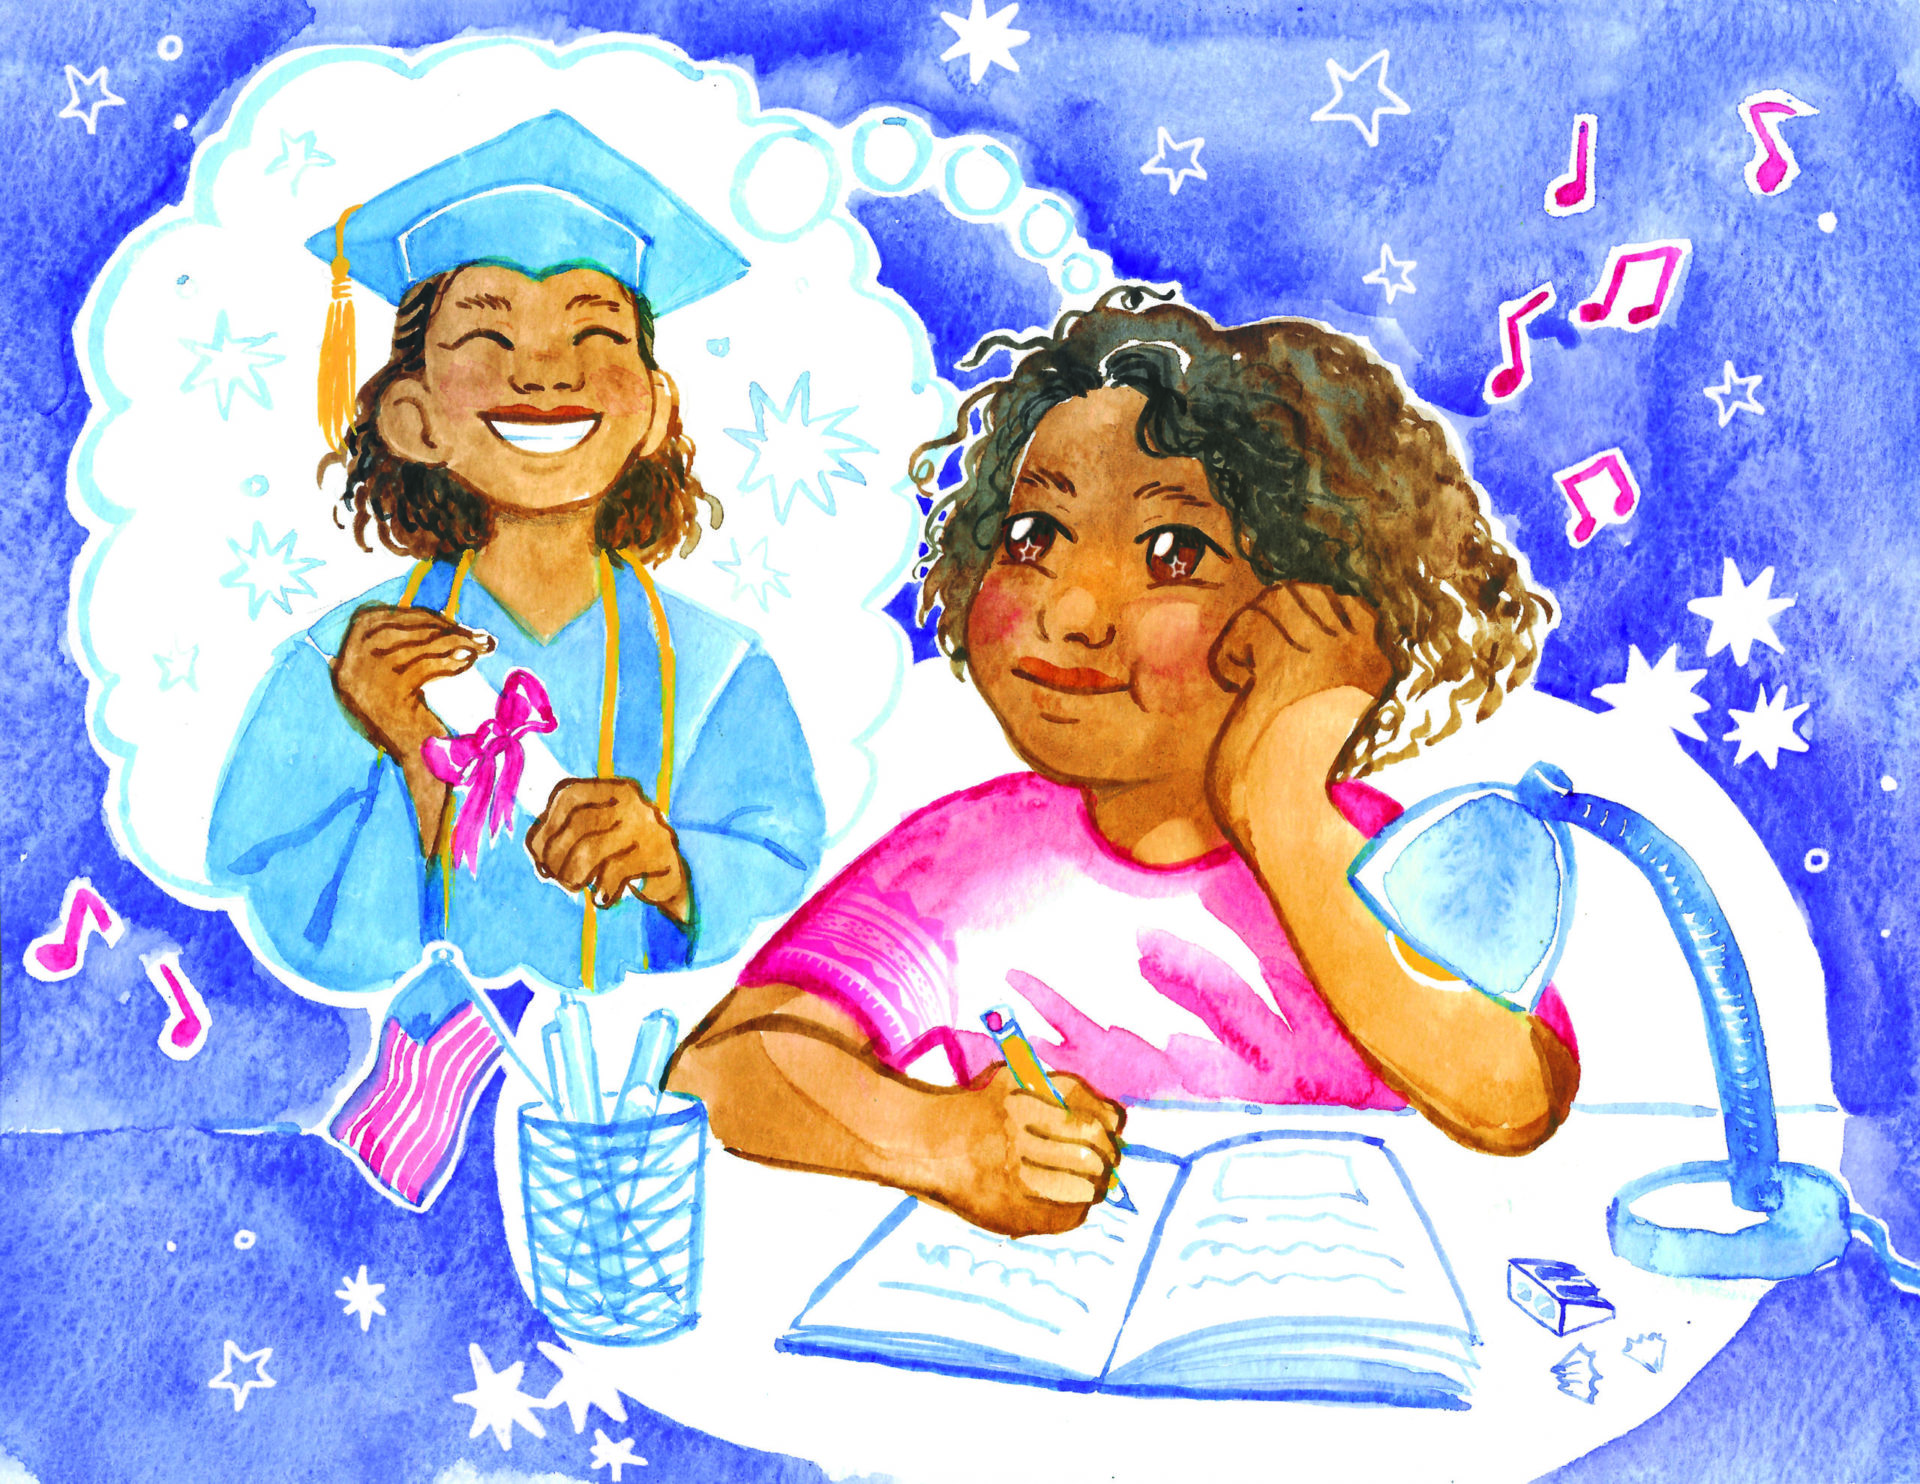 A young student daydreams about graduation while studying at a desk, surrounded by a colorful, watercolor-styled illustration with musical notes and stars.